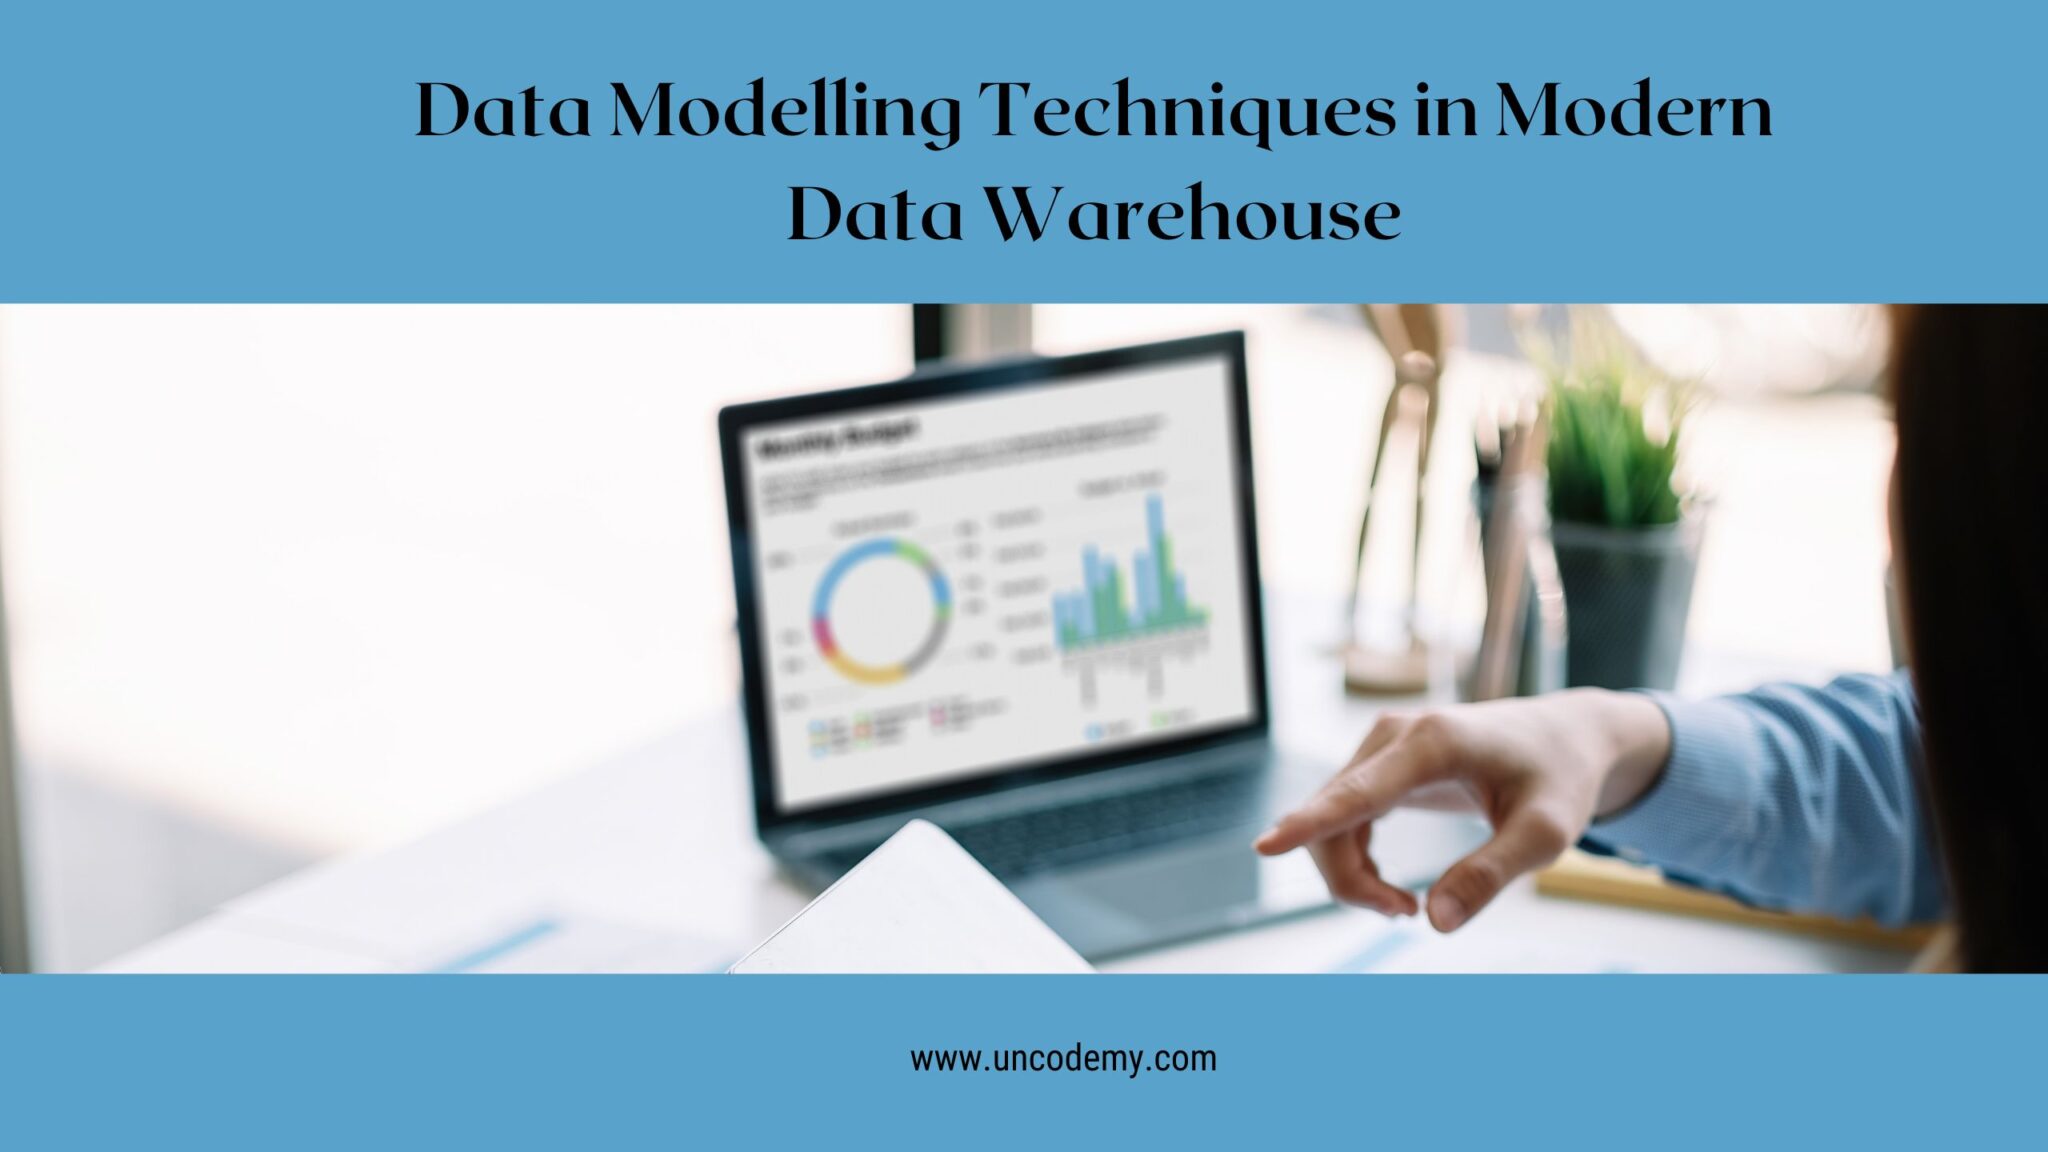 Data Modeling Techniques in Modern Data Warehouse: Navigating the Landscape of Insightful Architecture